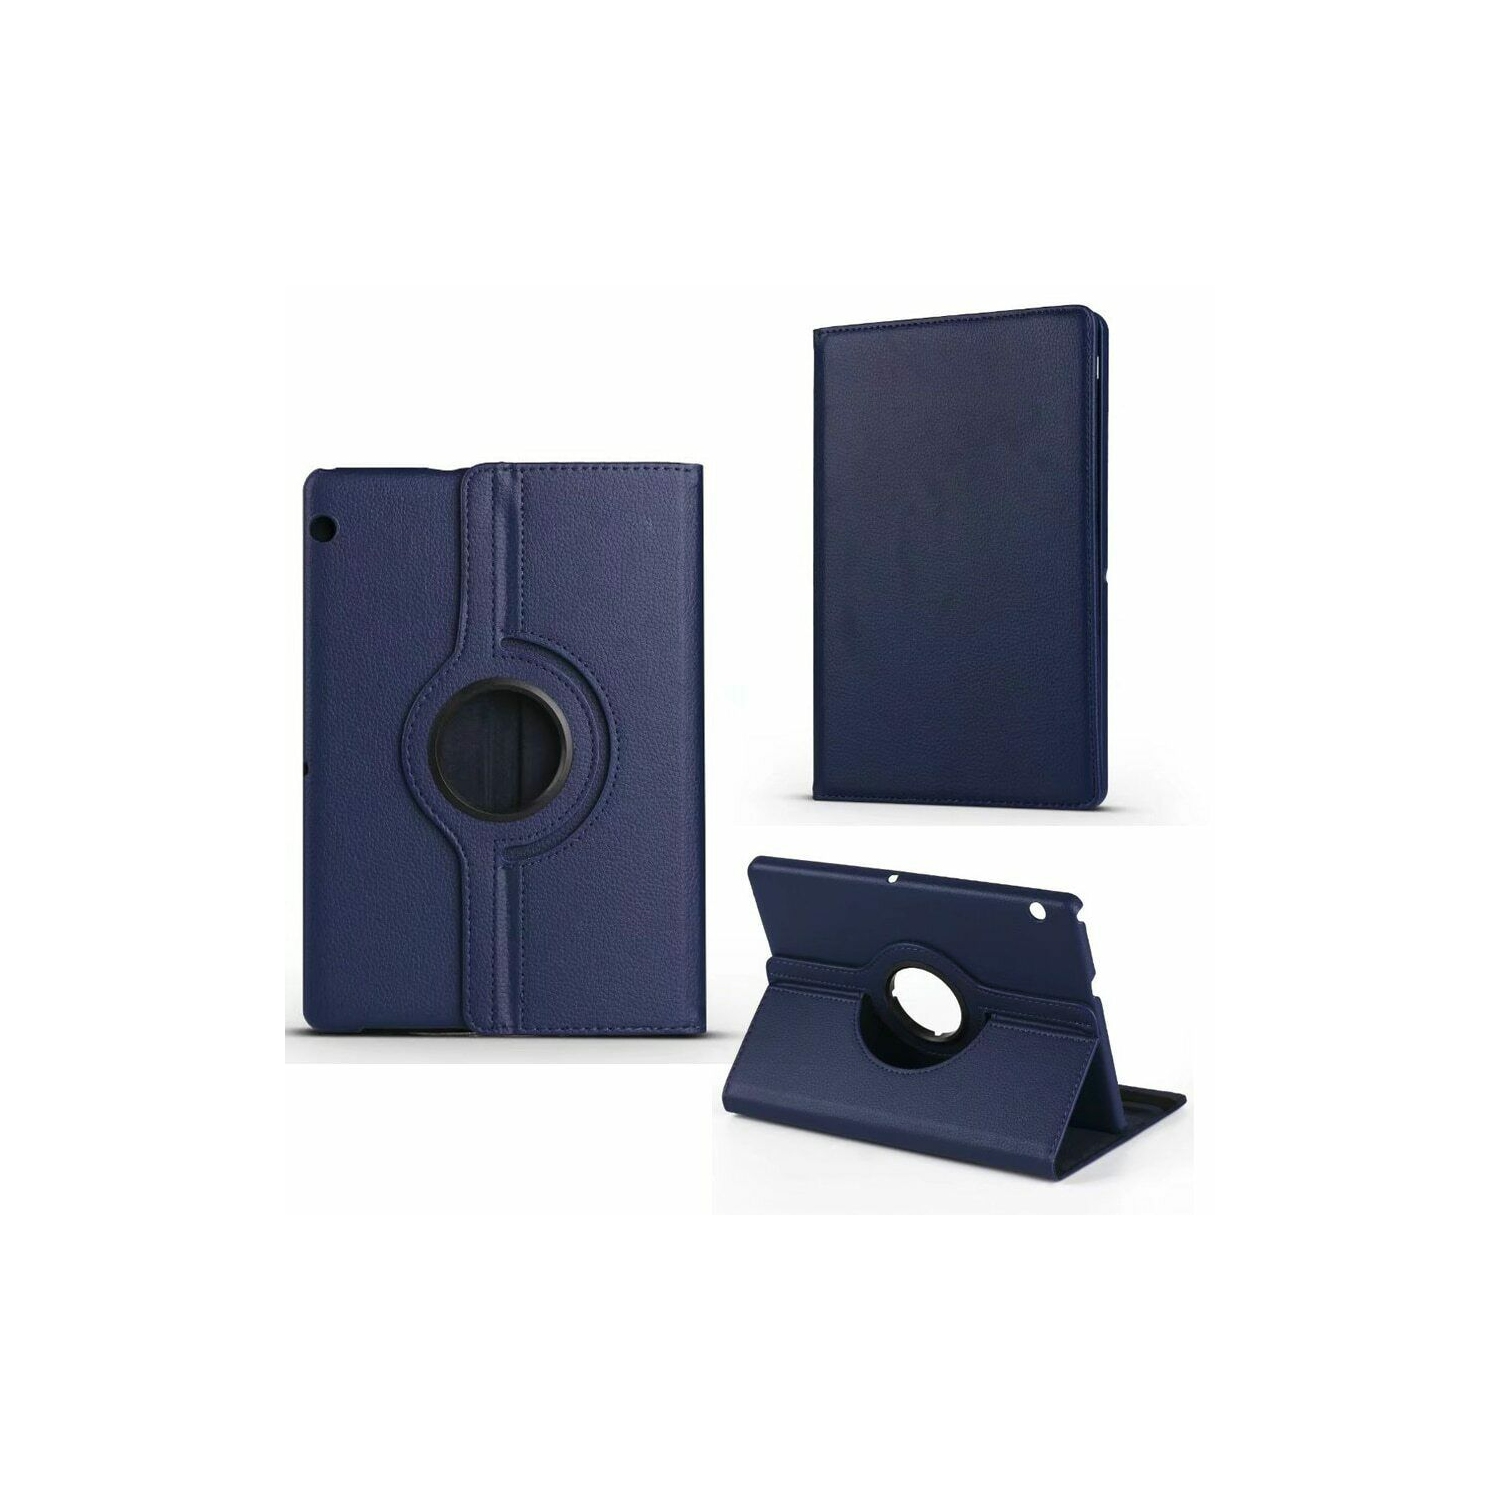 【CSmart】 360 Rotating PU Leather Stand Case Smart Cover for Huawei Mediapad T5 10 10.1", Navy